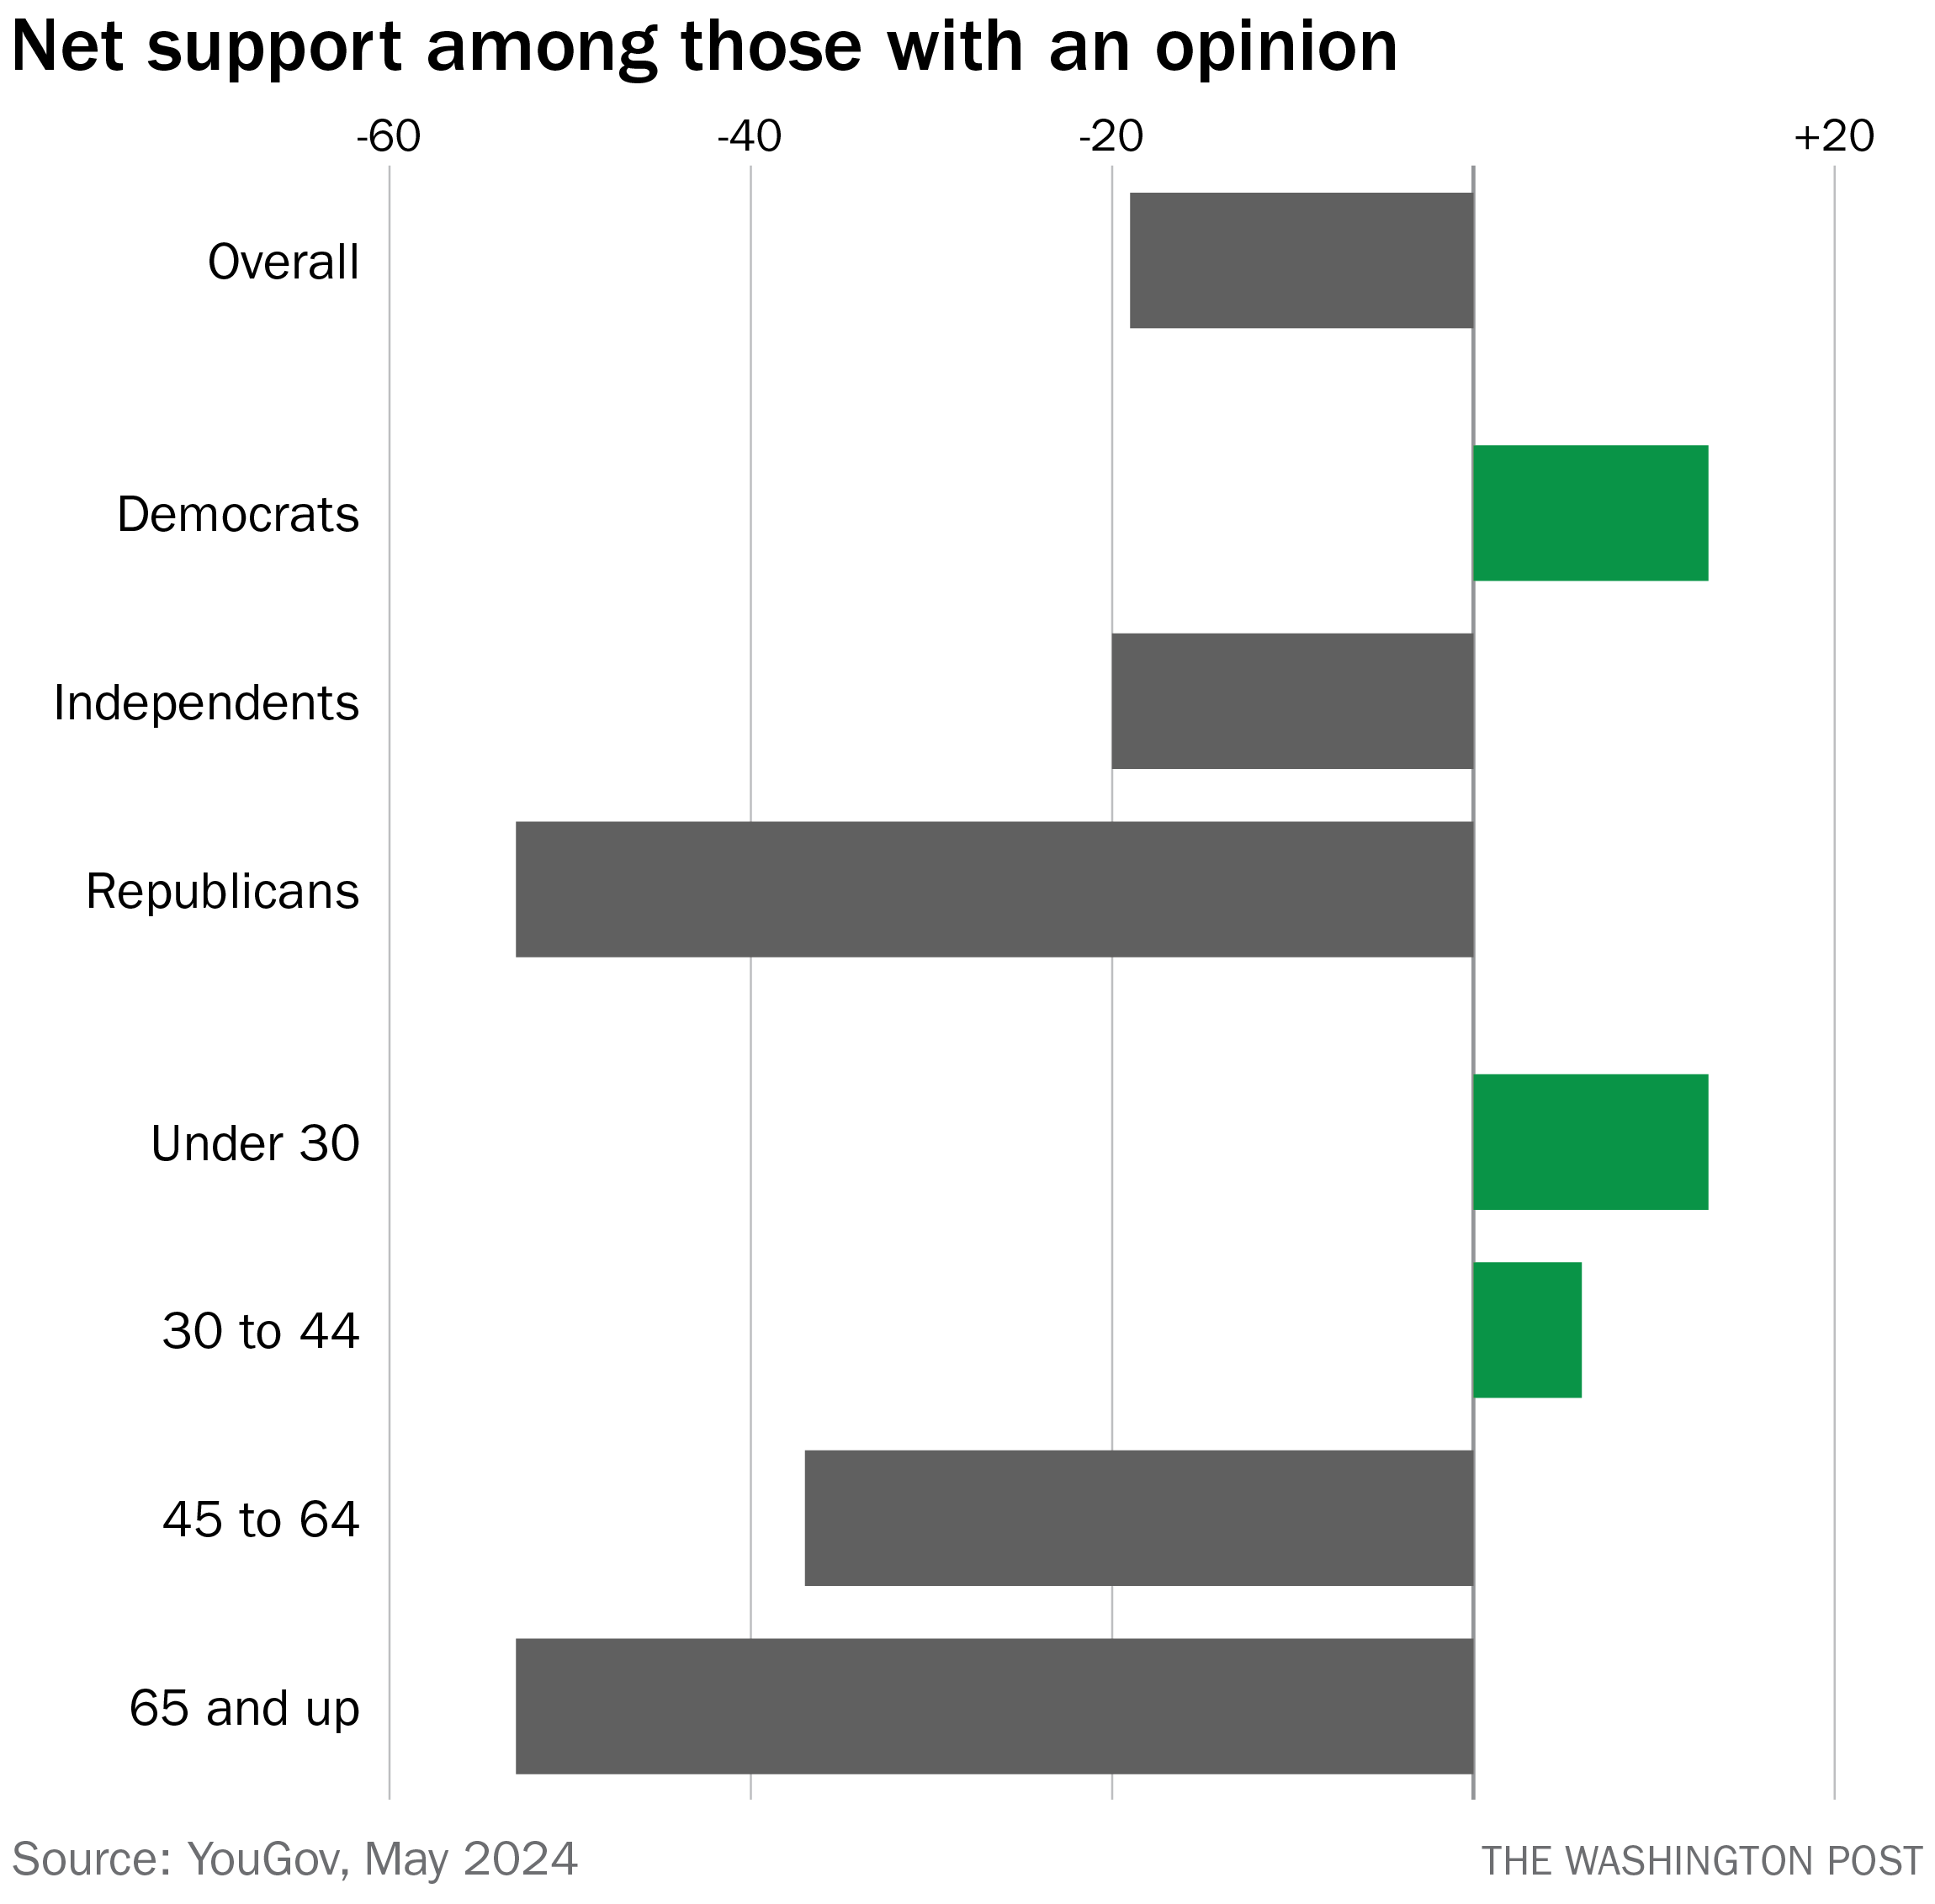 americans are more likely to oppose than support campus protests